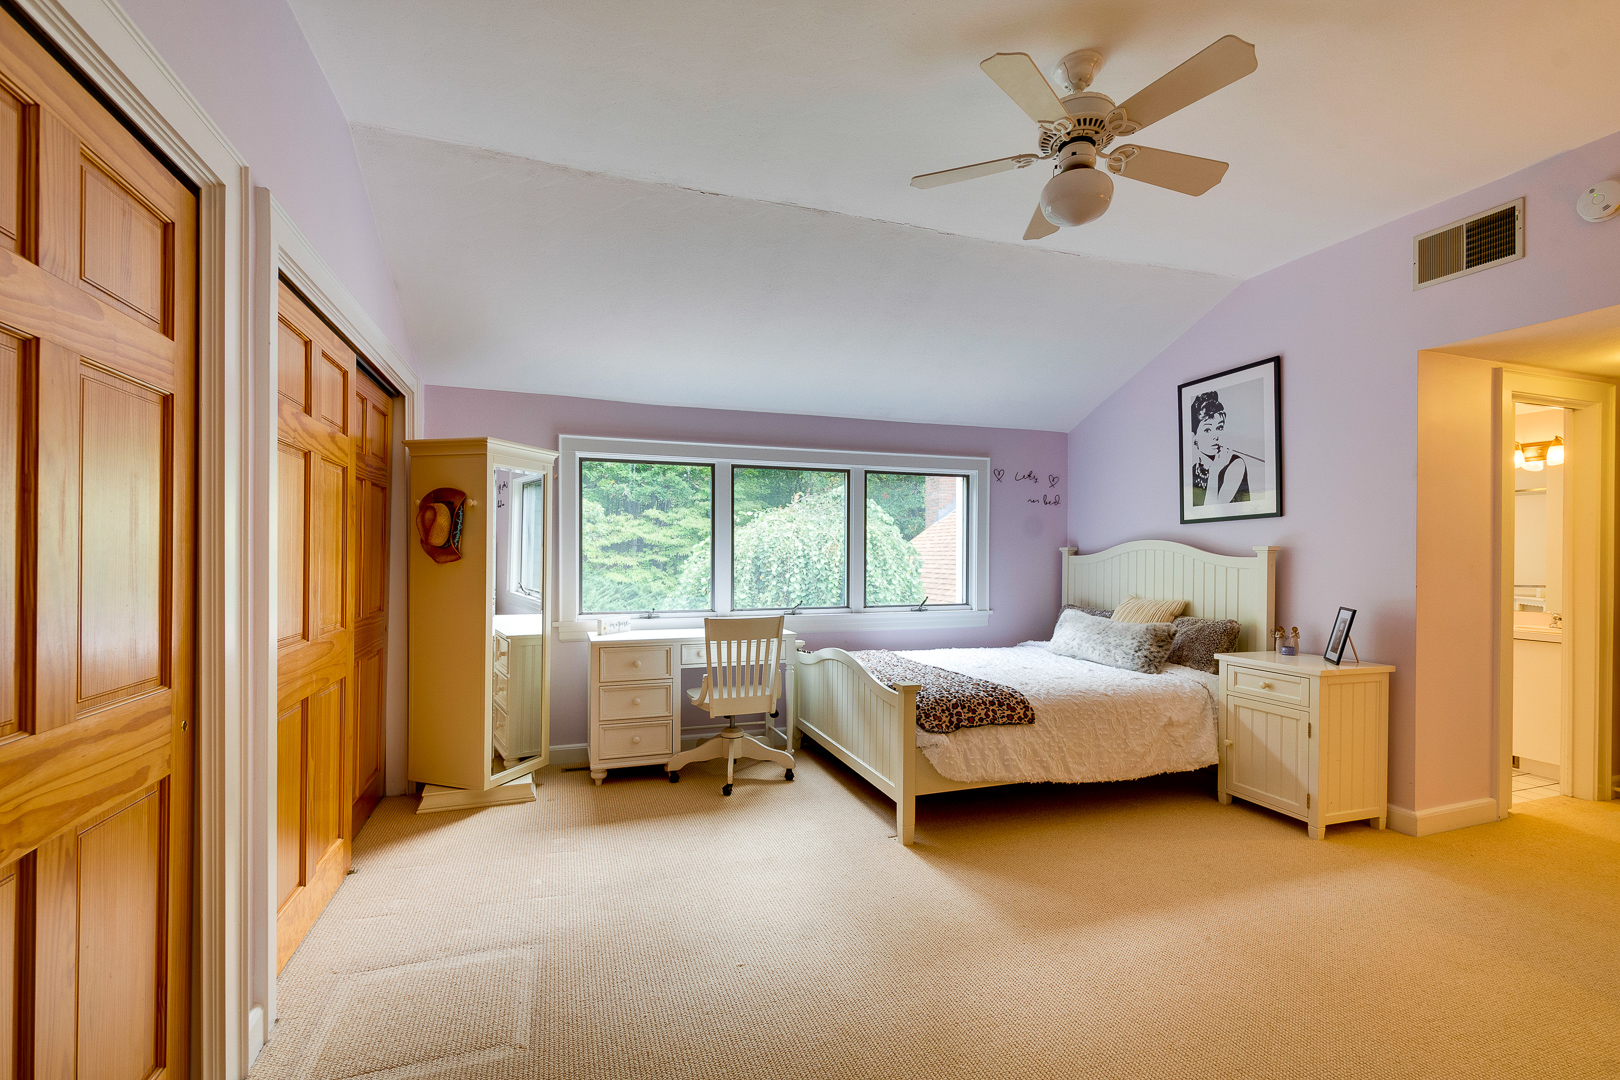 Thomas Adach - Wellesley MA professional real estate photographer - 508-655-2225